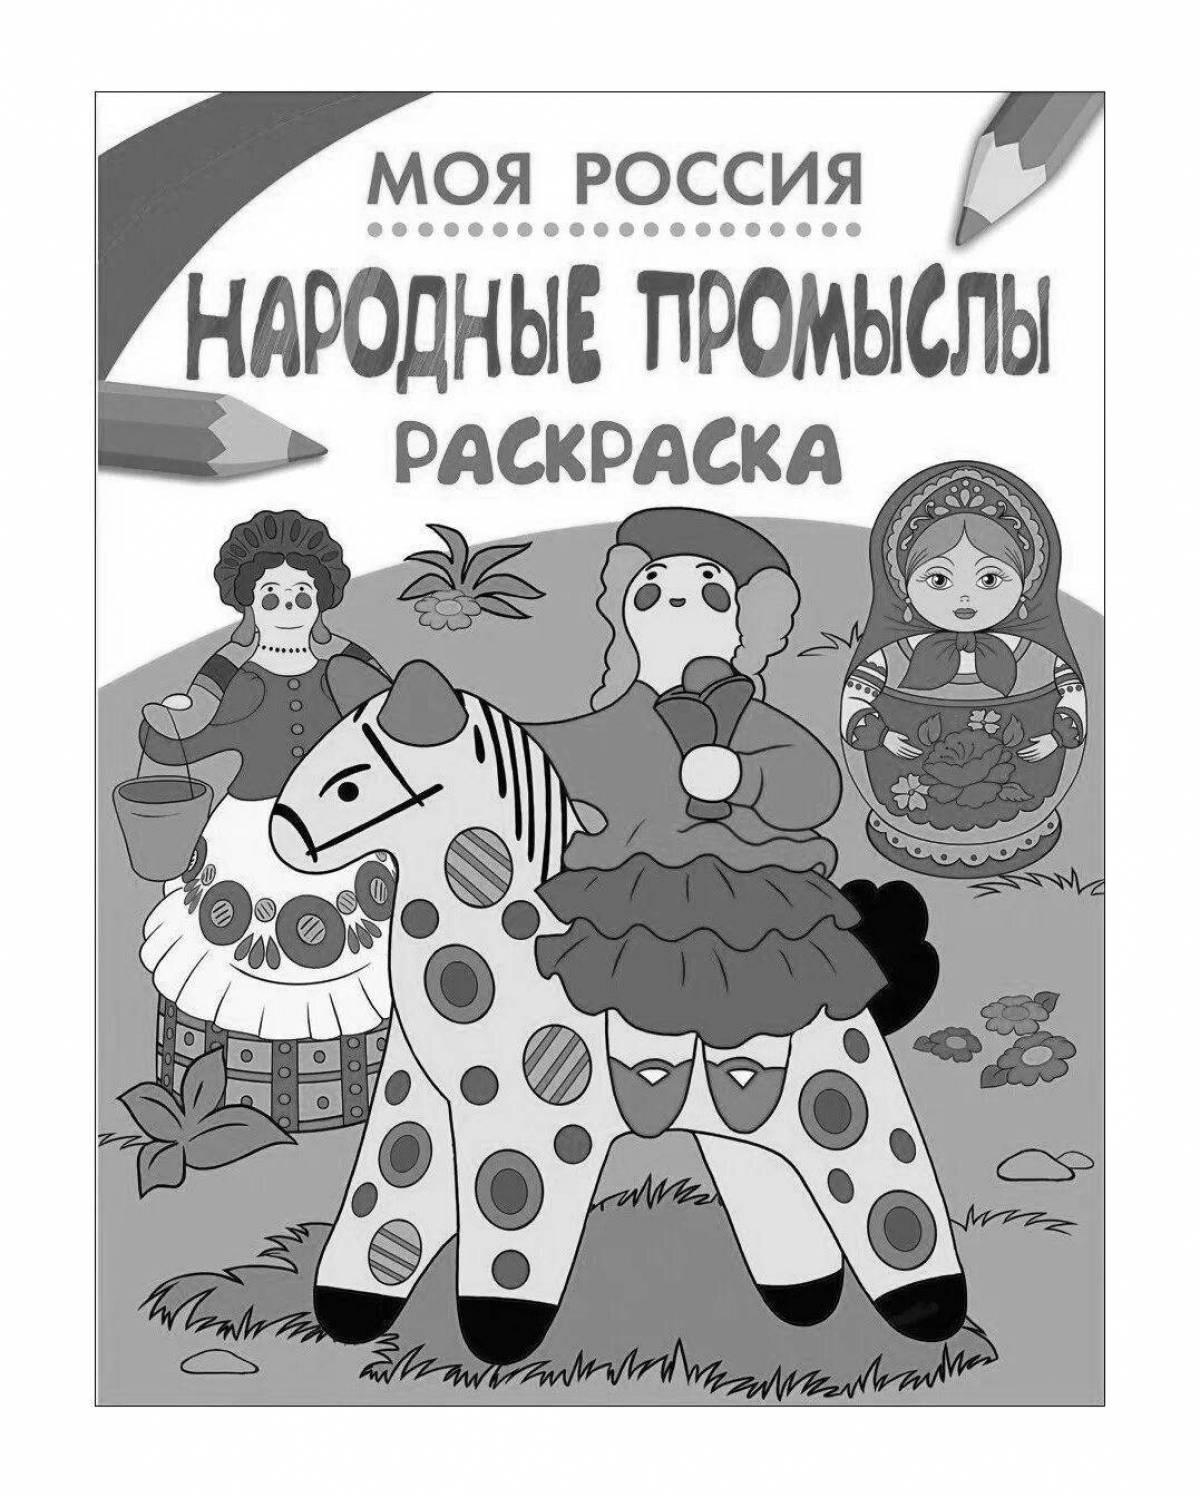 Adorable Russian folk crafts for kids